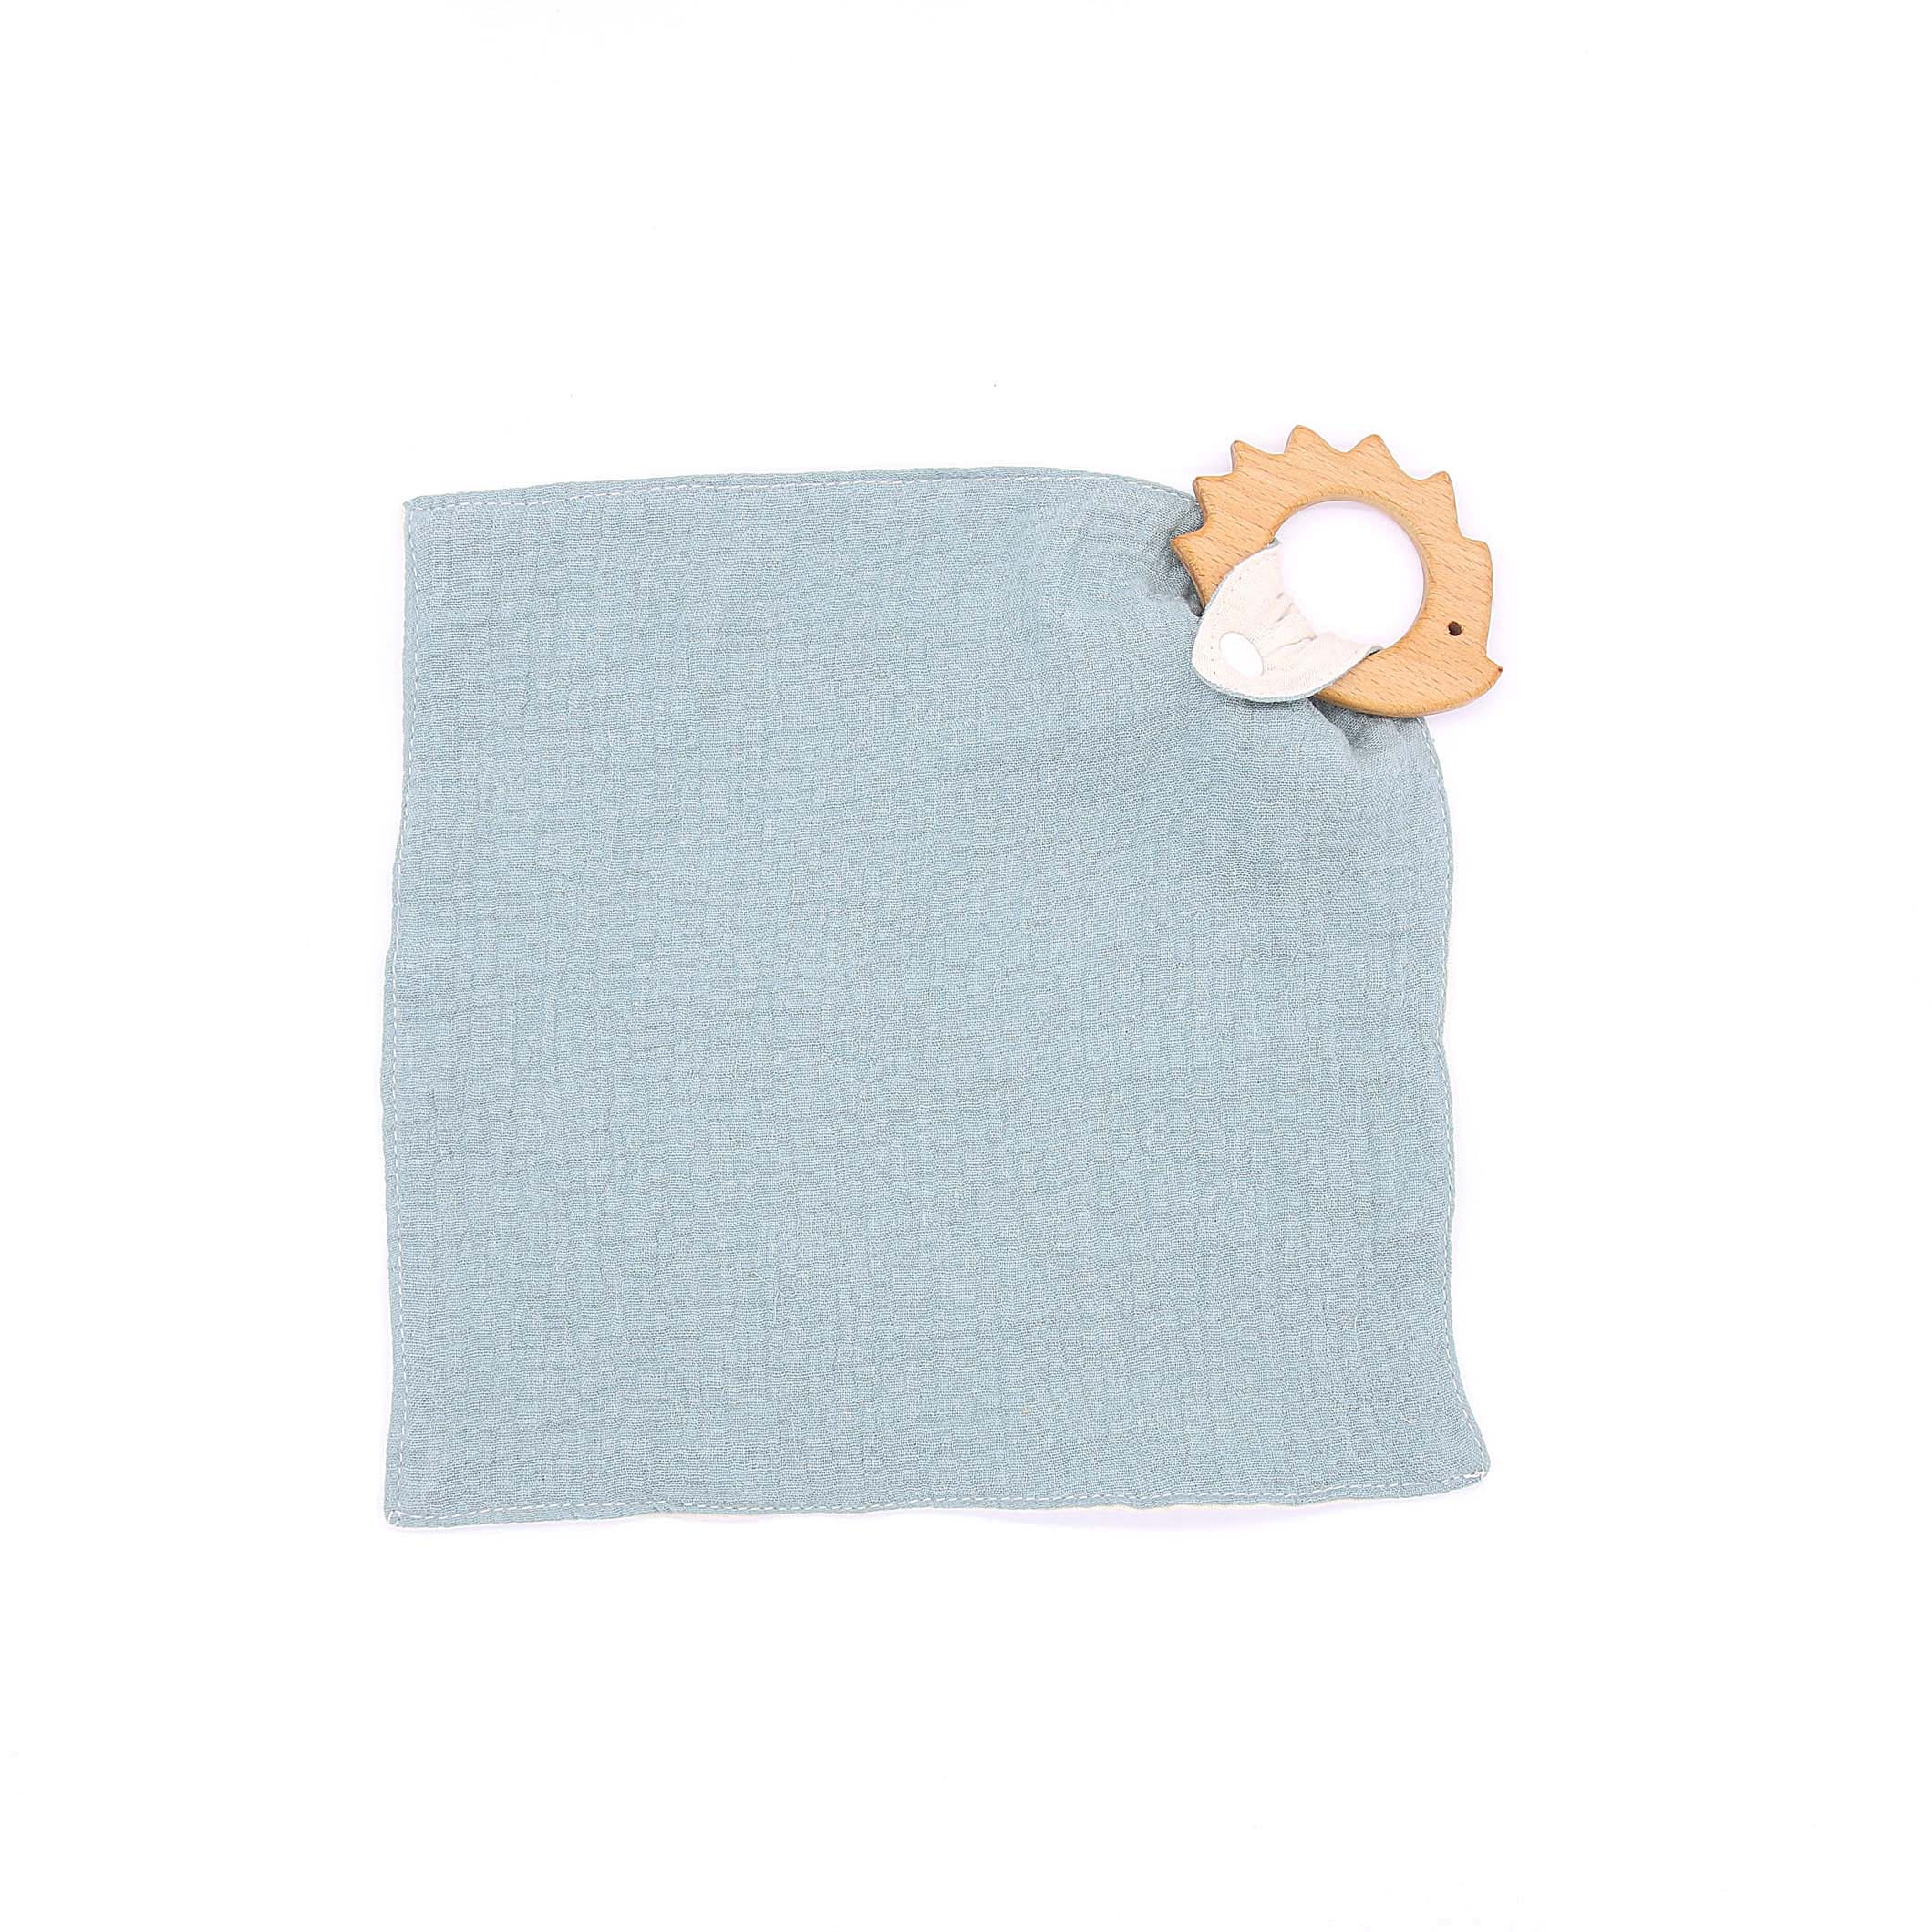 Cotton Muslin Cloths With Wooden Animal